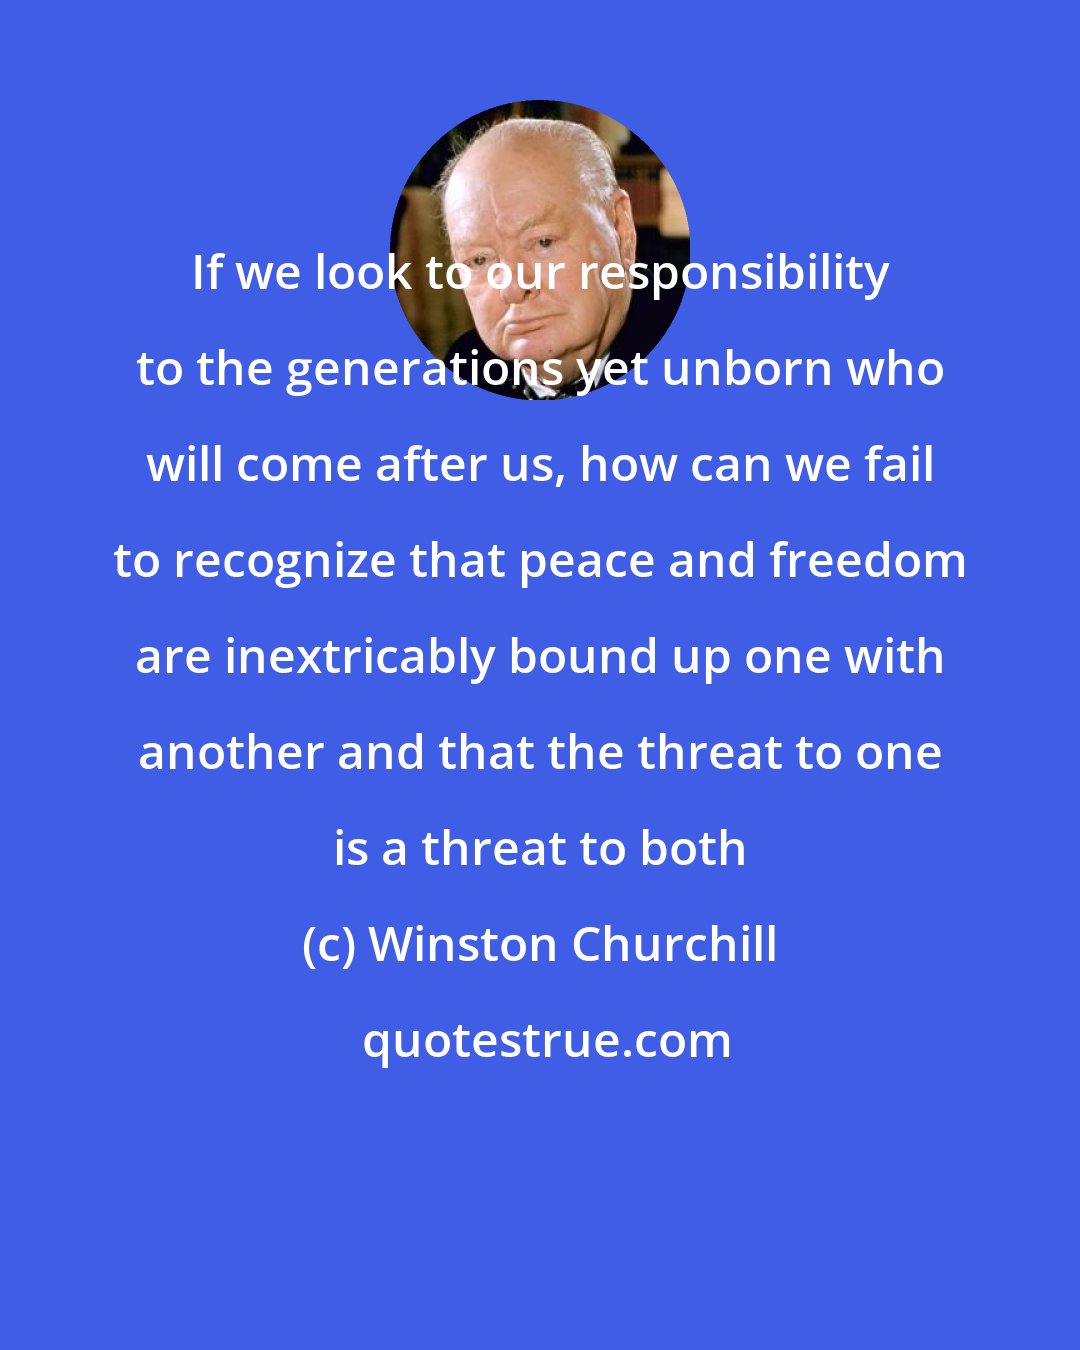 Winston Churchill: If we look to our responsibility to the generations yet unborn who will come after us, how can we fail to recognize that peace and freedom are inextricably bound up one with another and that the threat to one is a threat to both